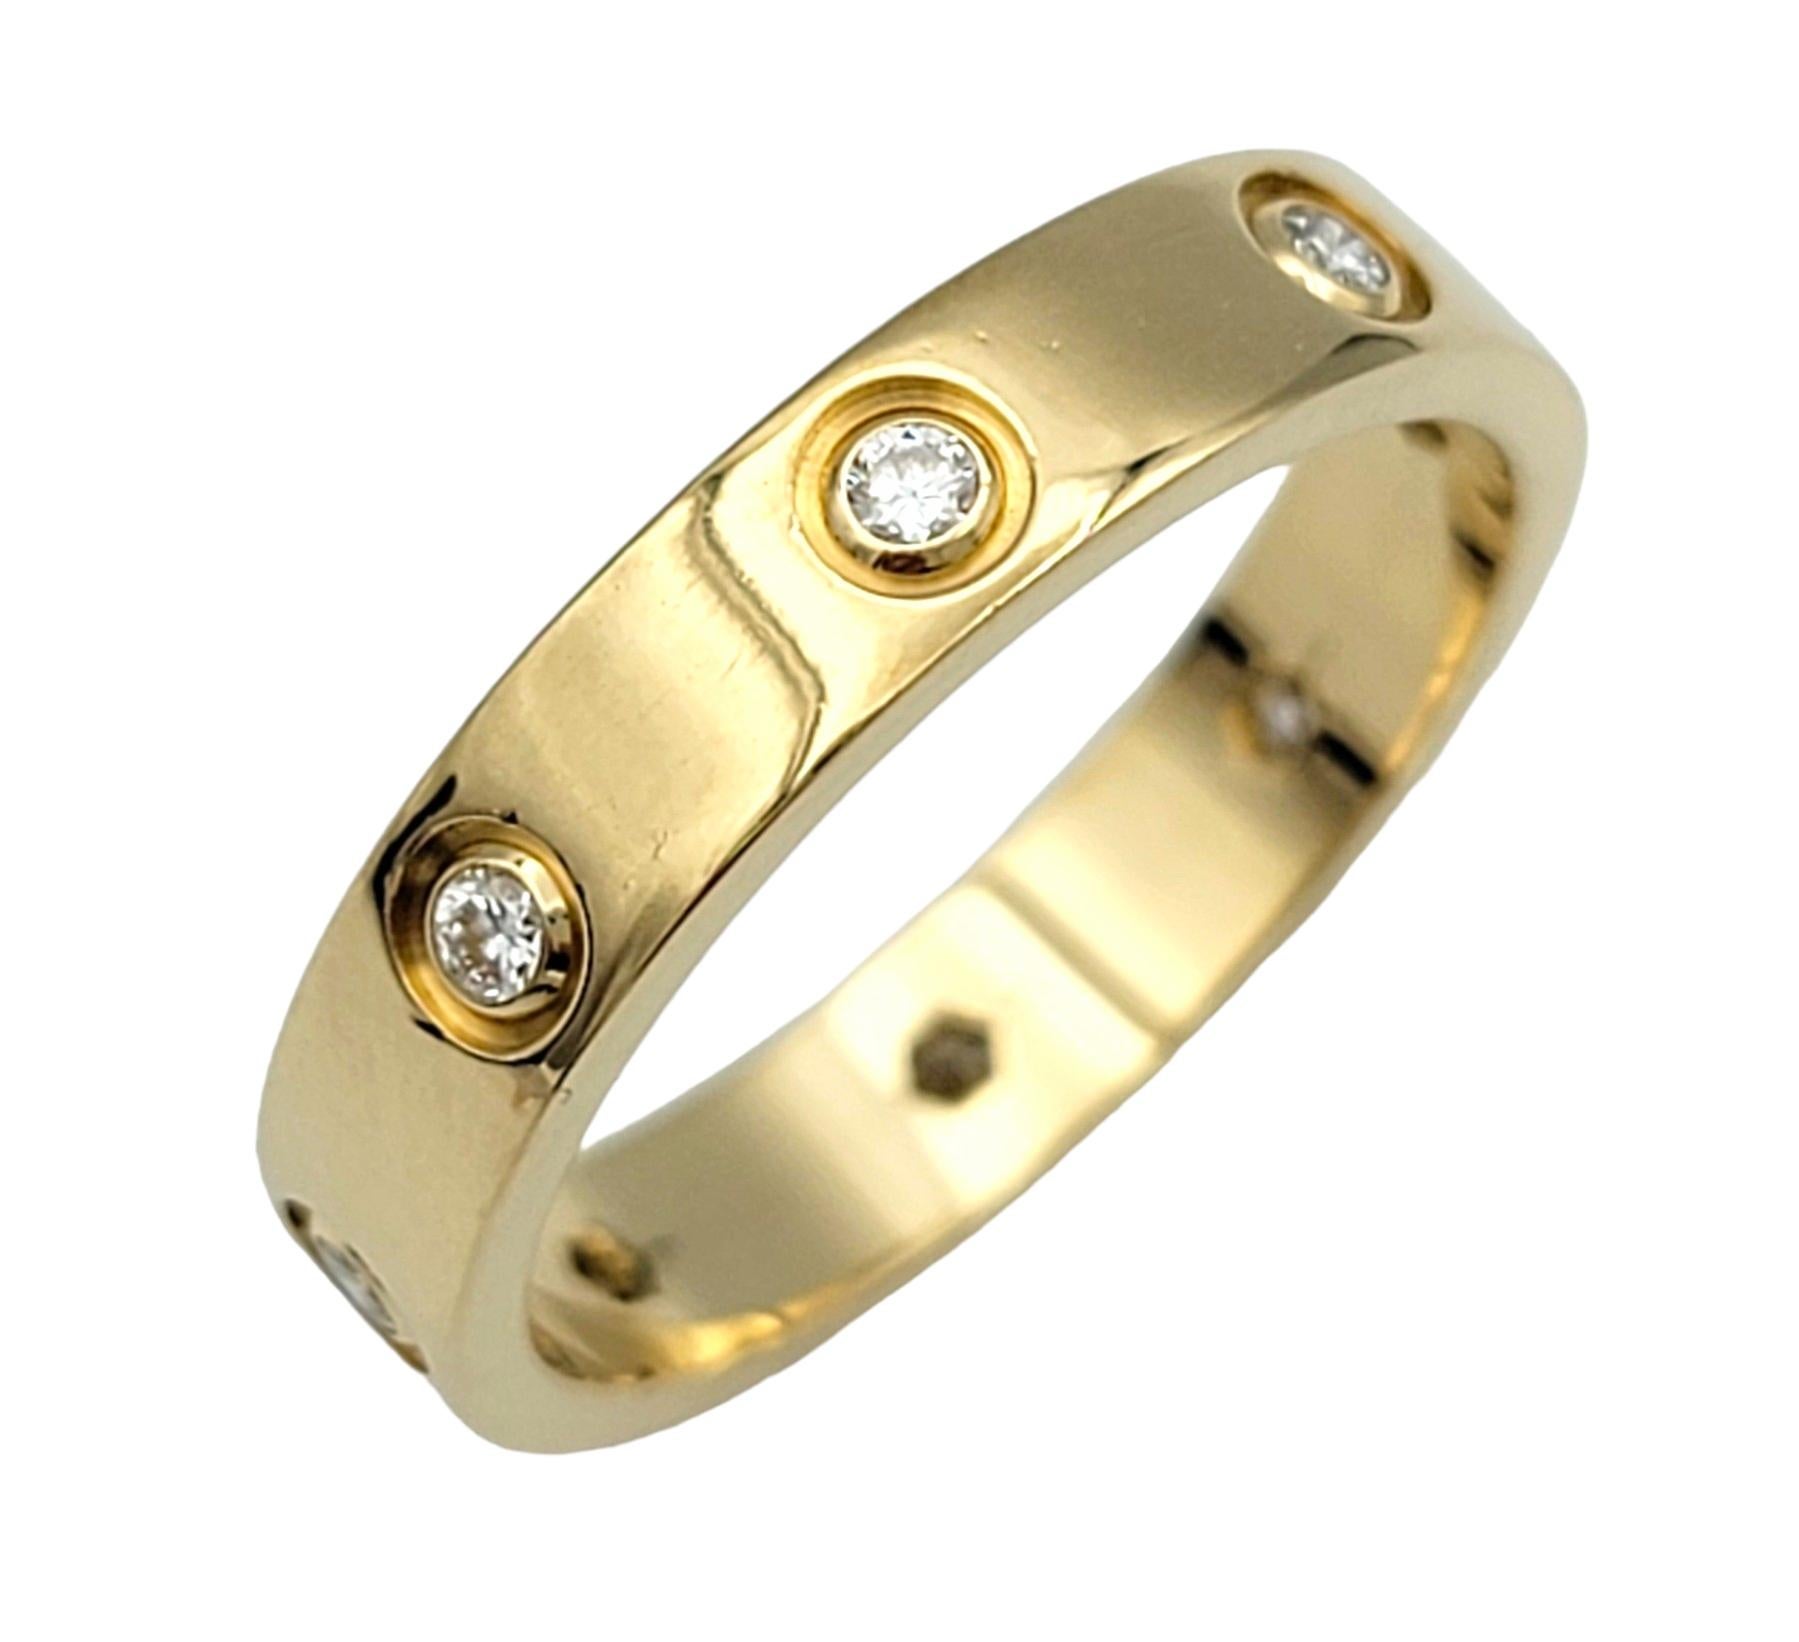 Ring Size: 6.75

This beautiful Cartier Love band ring with diamonds is an iconic symbol of enduring love and timeless elegance. Crafted by the renowned luxury brand Cartier, this ring embodies sophistication and luxury in every detail. The band